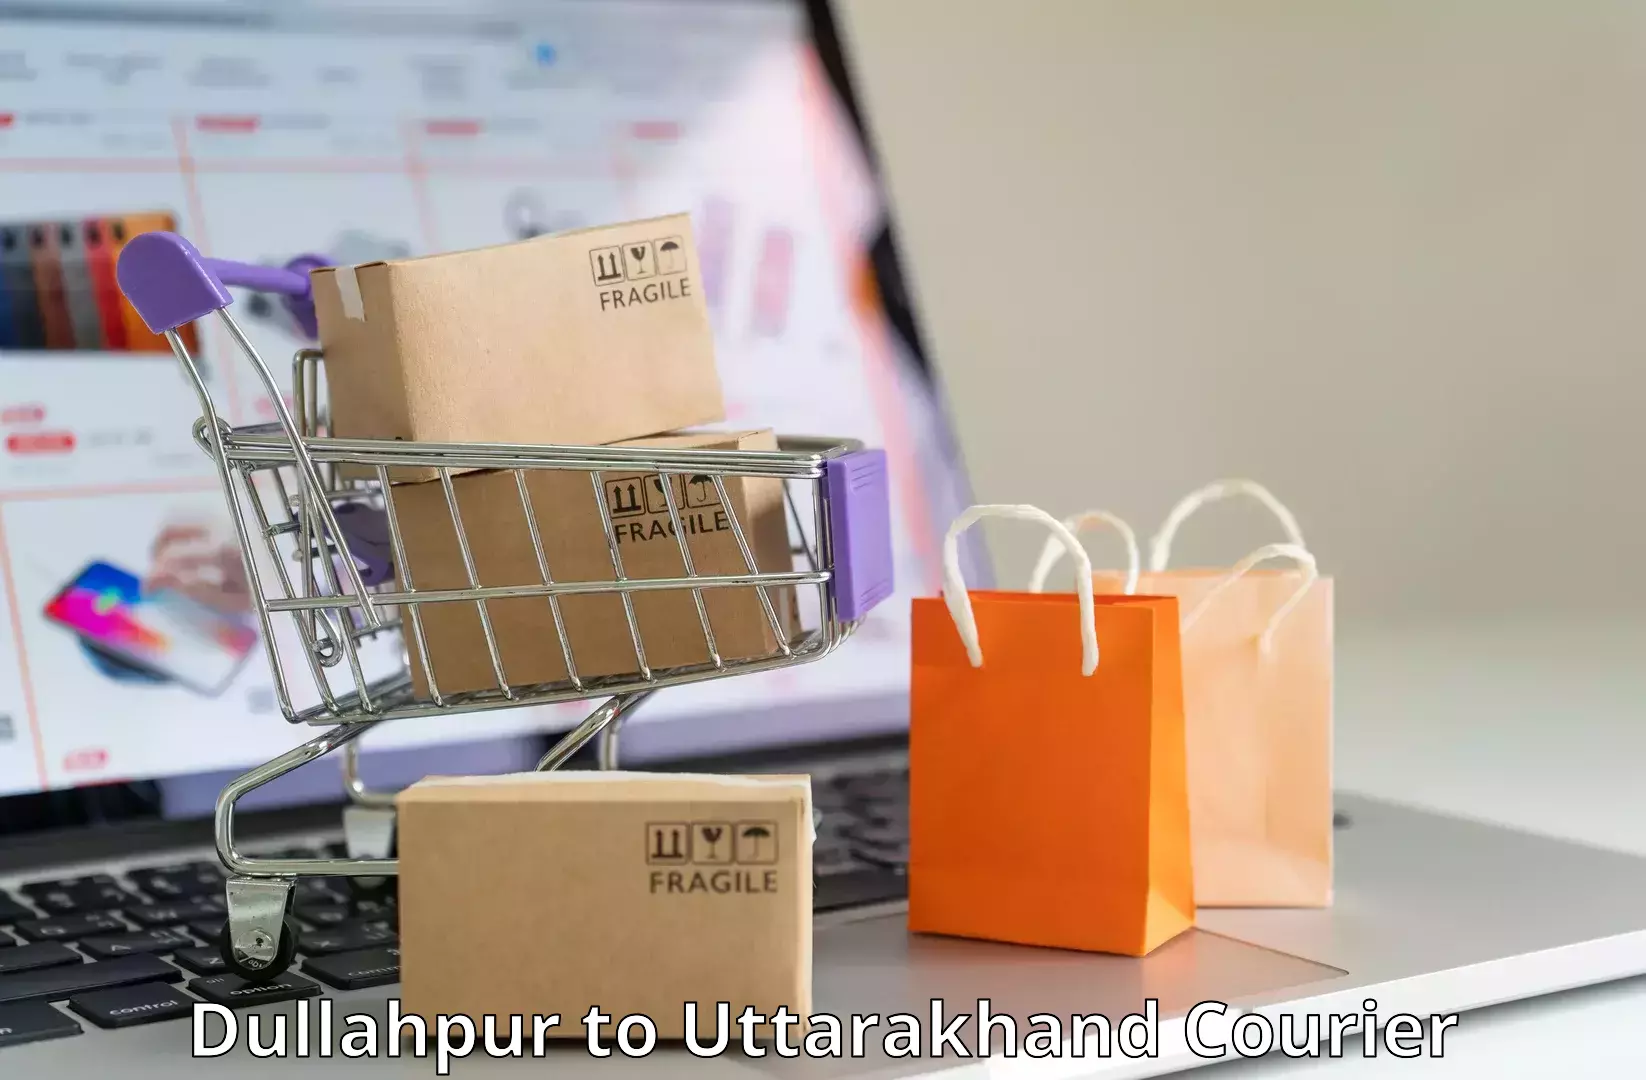 User-friendly delivery service Dullahpur to Tehri